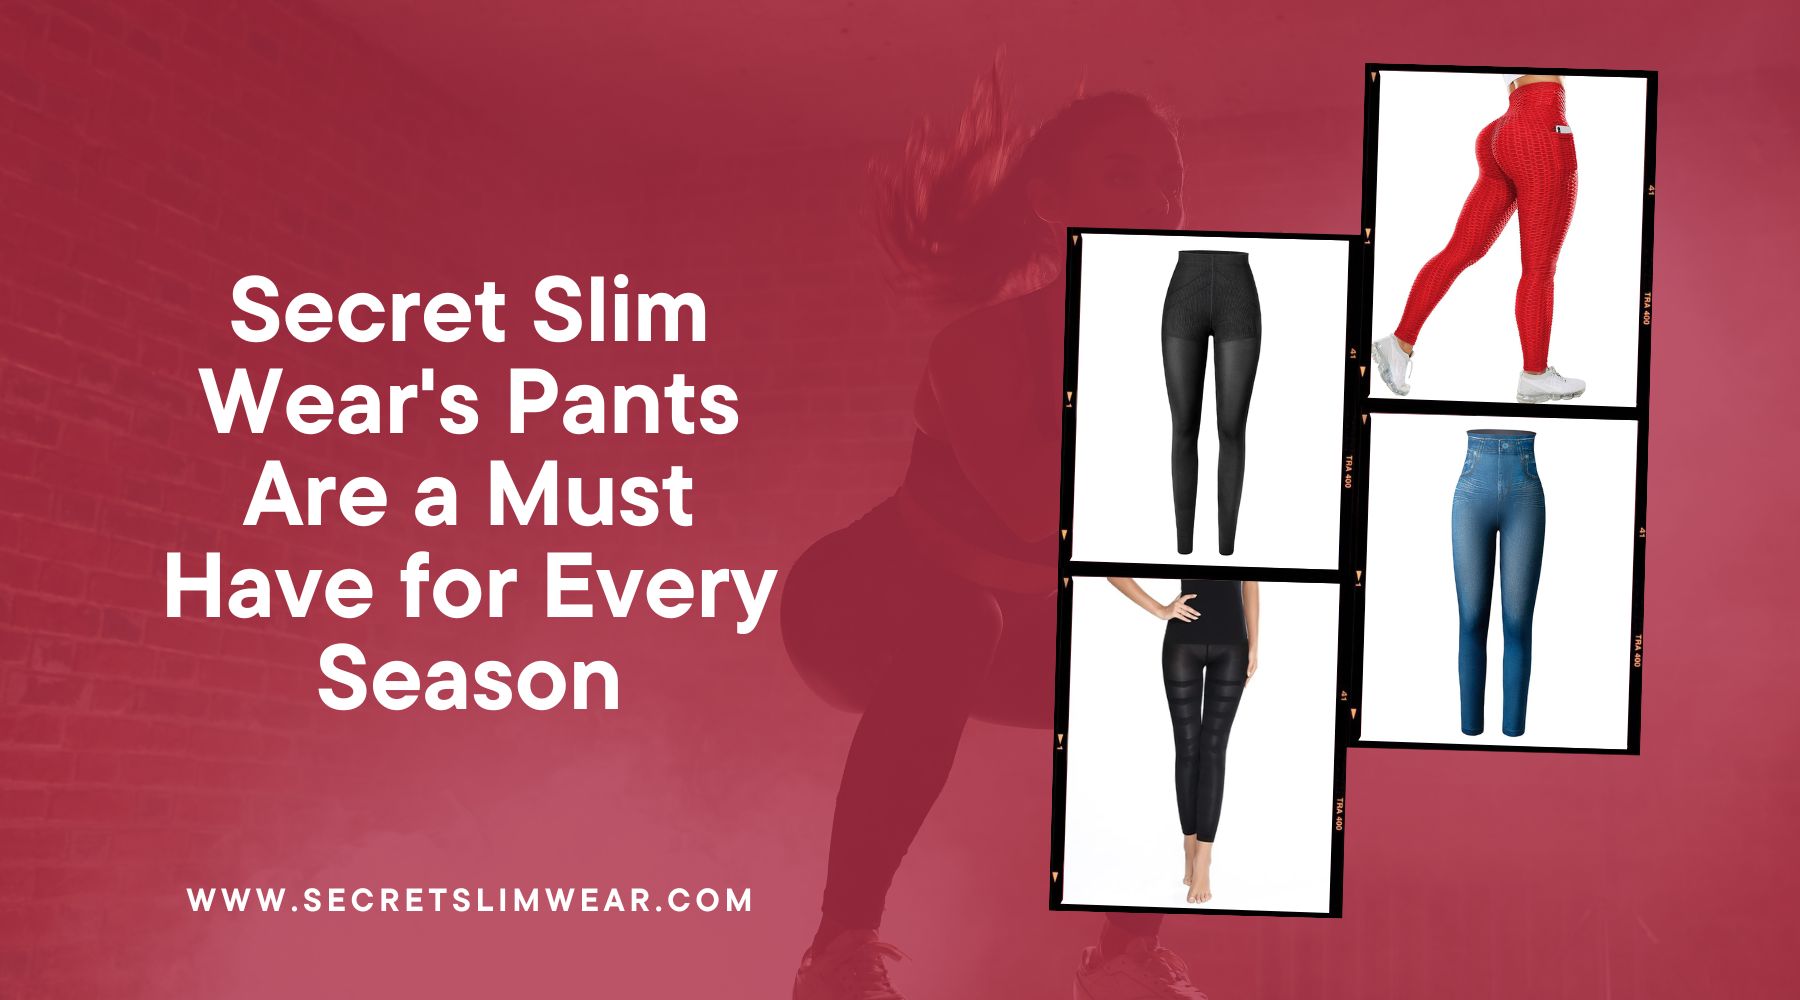 Why Secret Slim Wear's Pants Are a Must-Have for Every Season